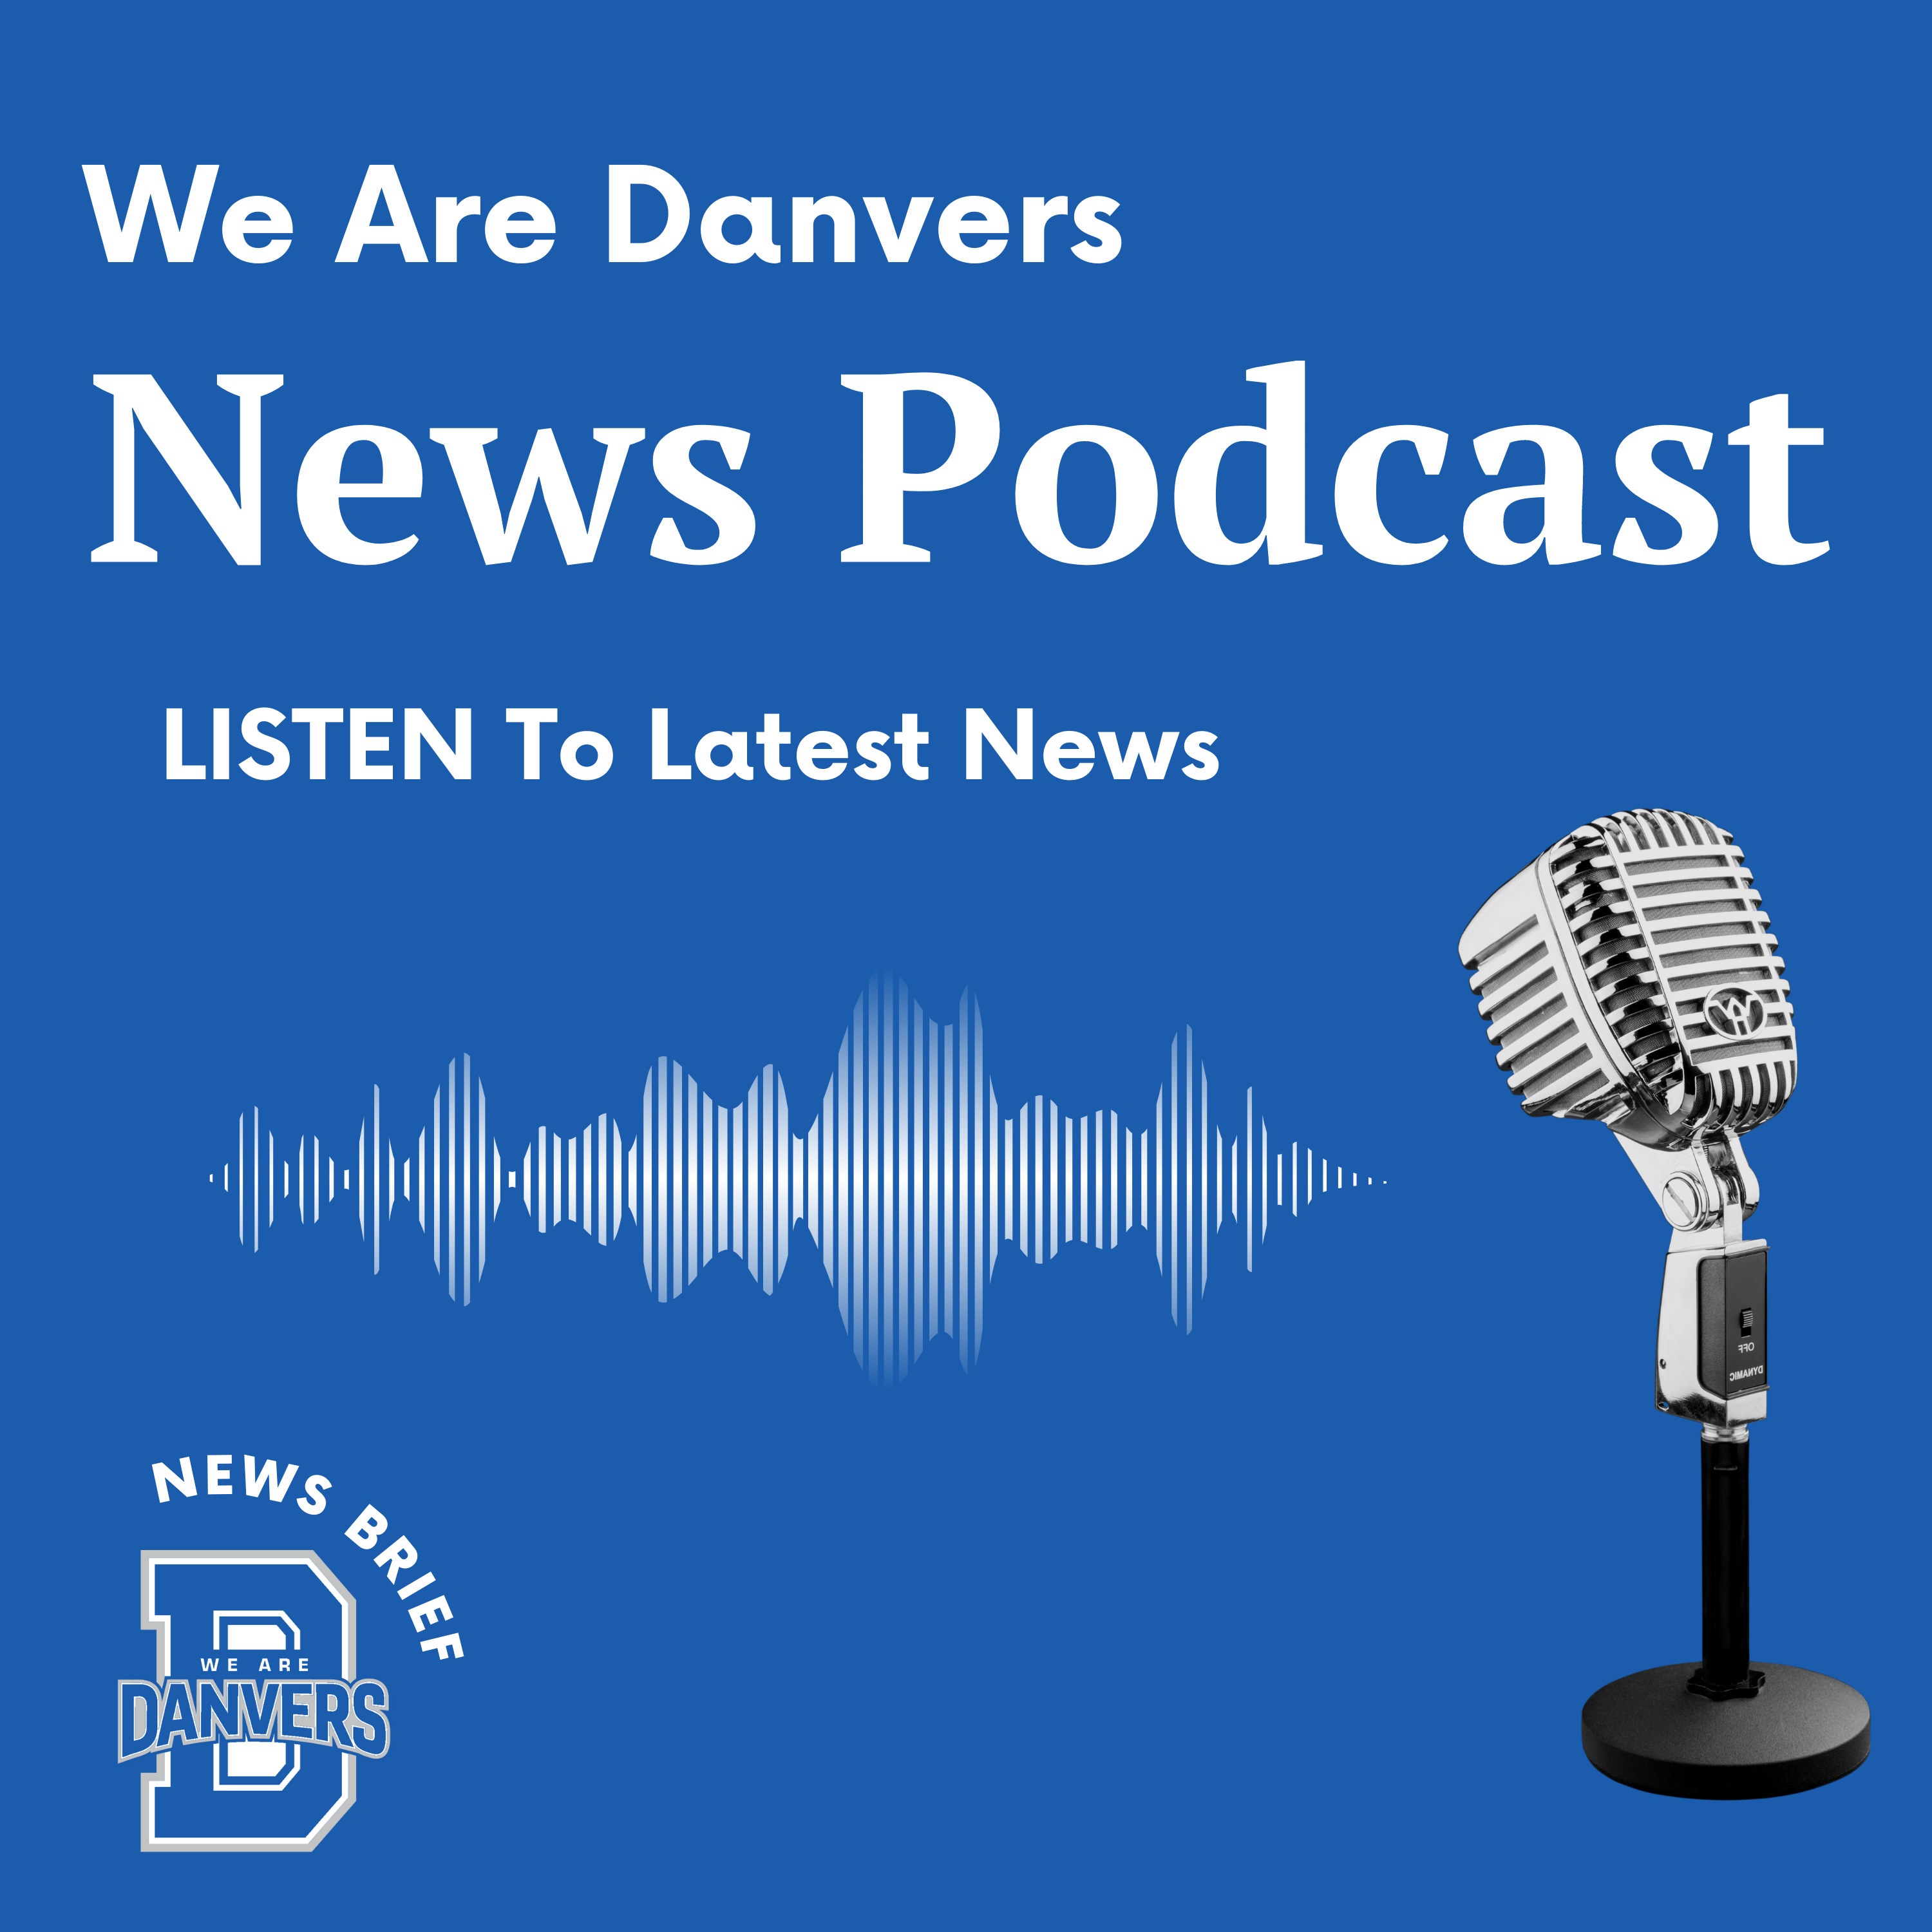 We Are Danvers - News Podcast